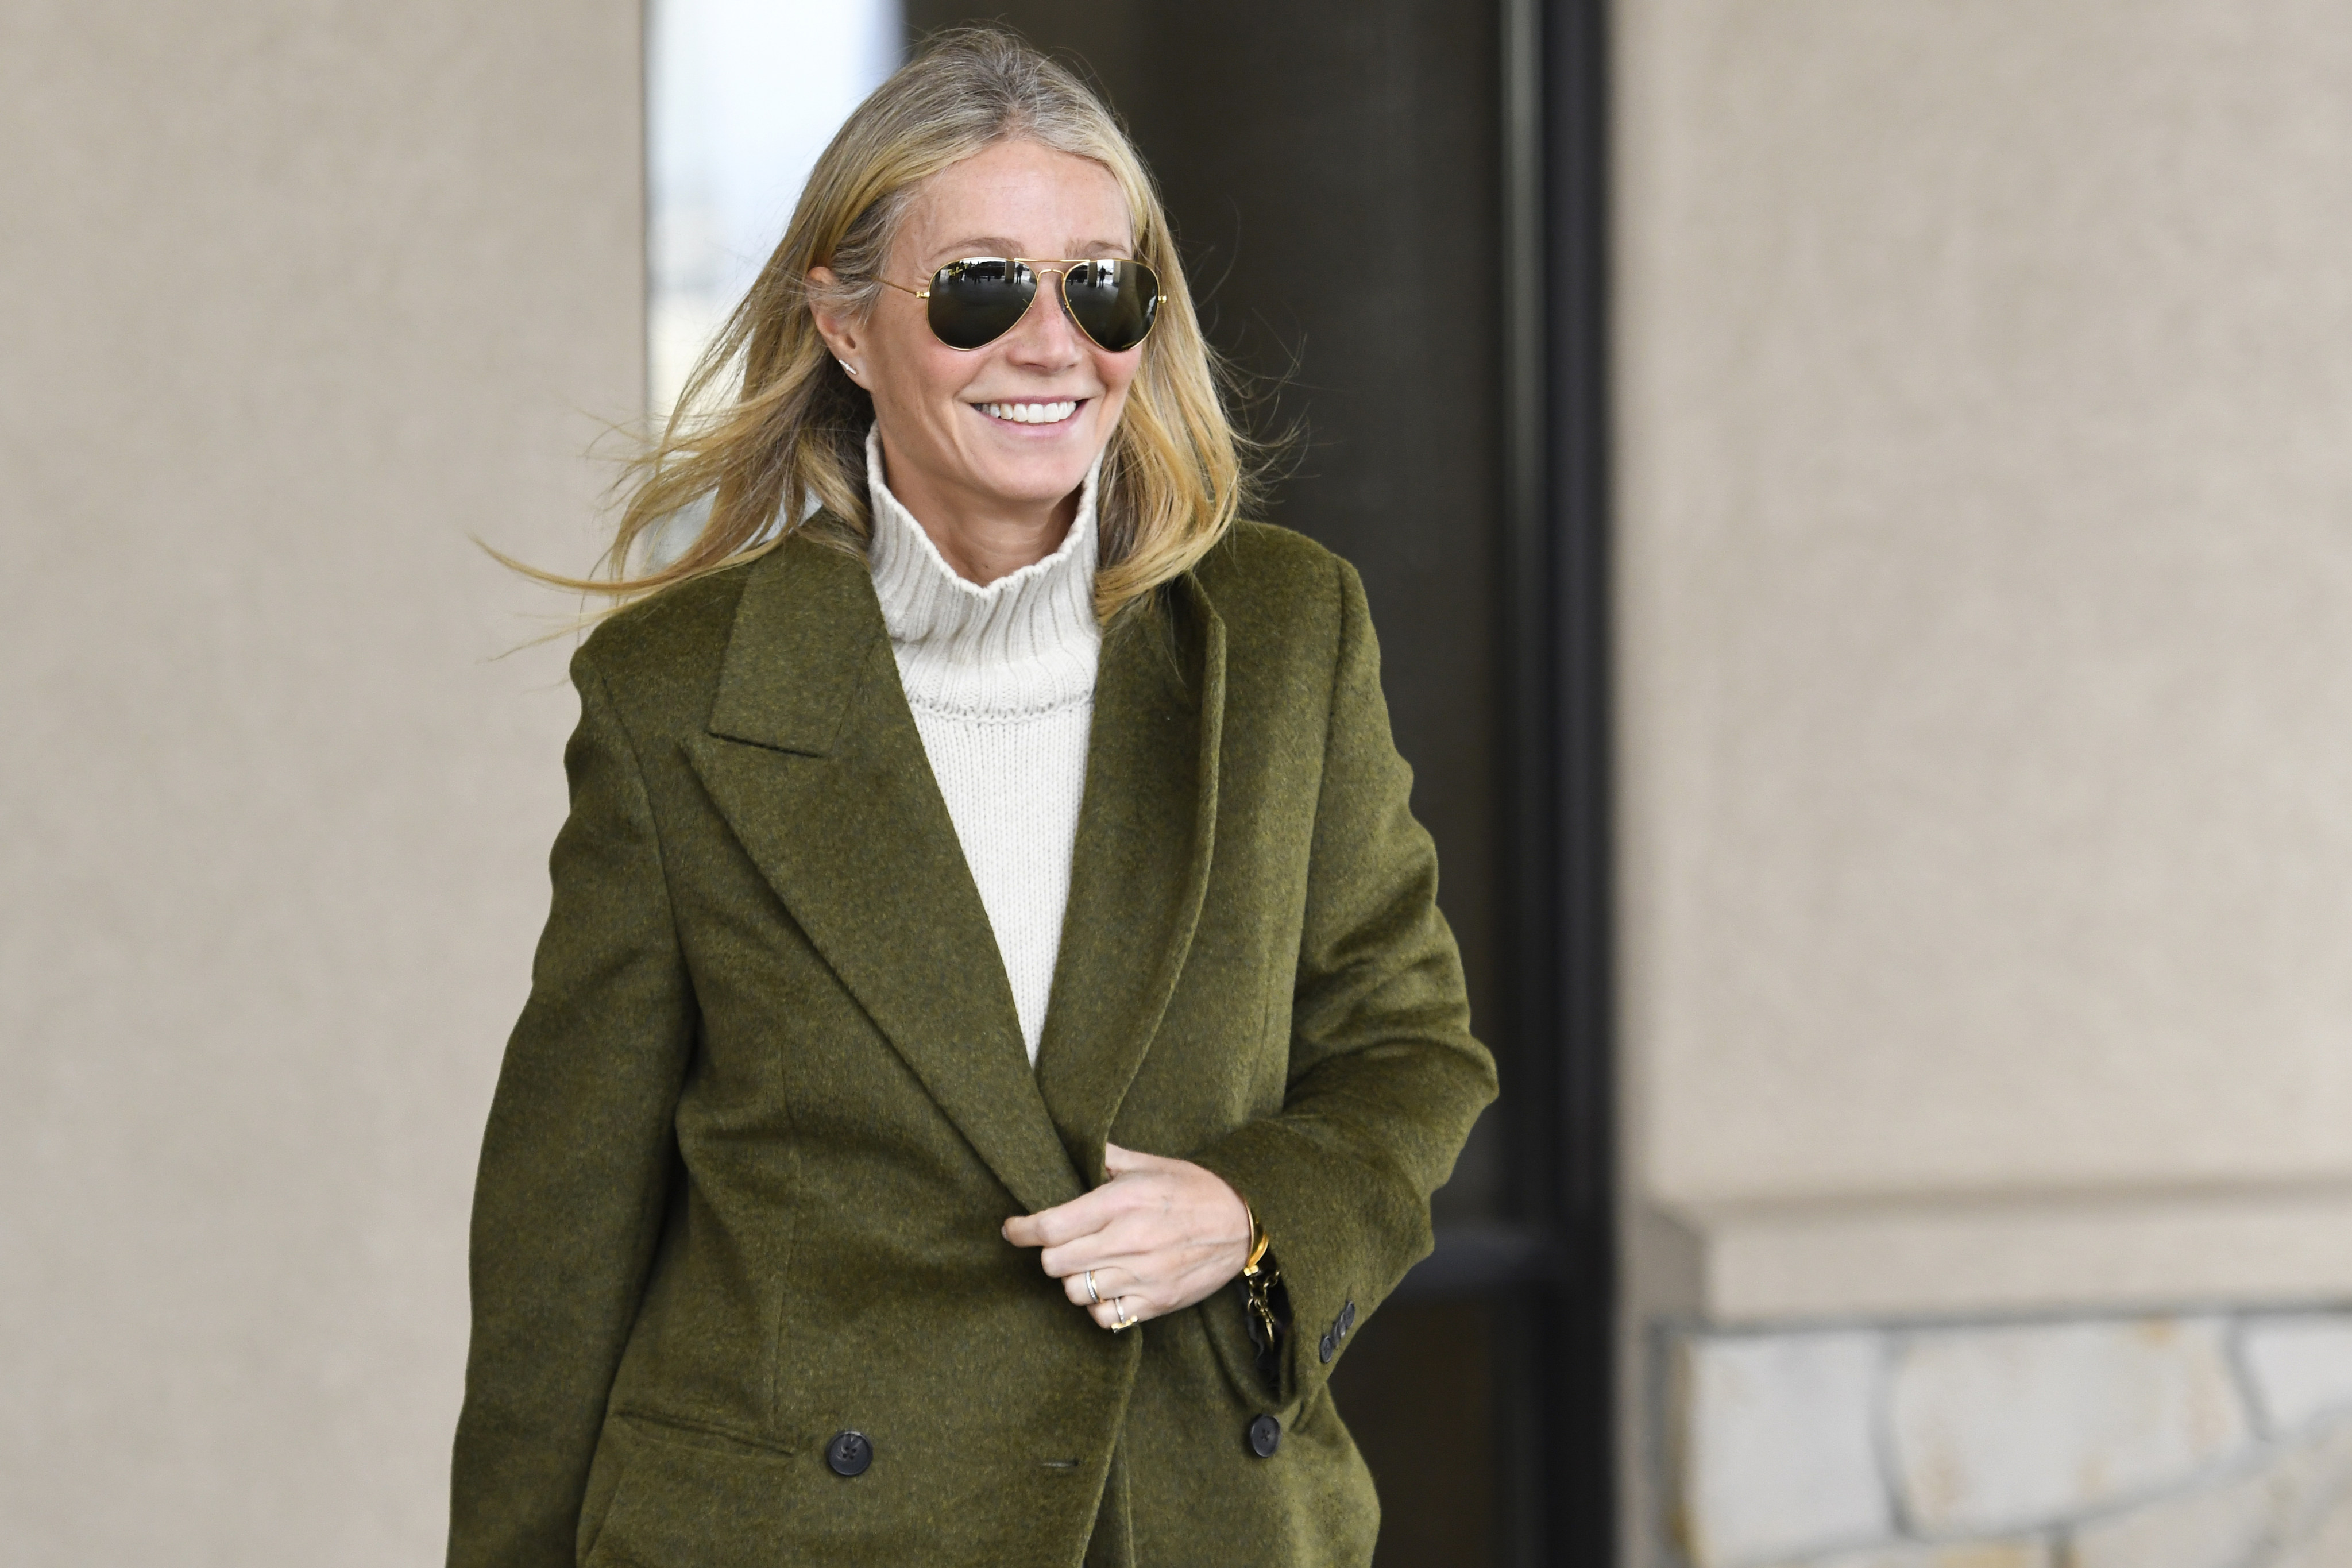 Gwyneth Paltrow leaves the courthouse during her recent lawsuit over a ski-slope collision wearing an outfit that epitomises the “quiet luxury” trend. But Where did this wave of pared down fashion begin? Photo: AP